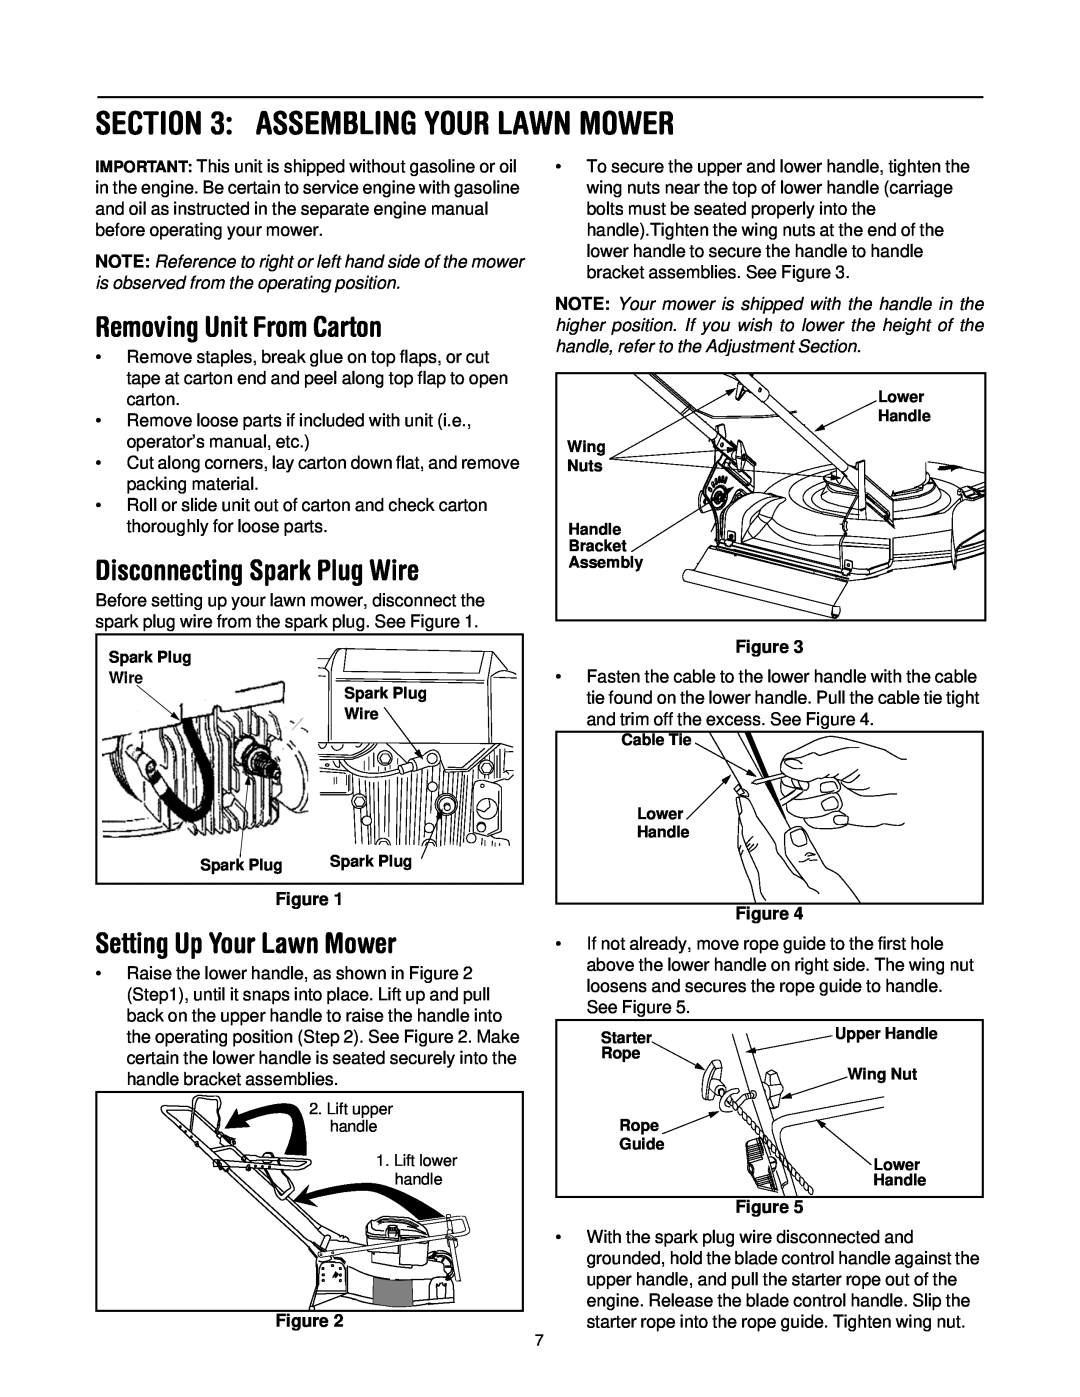 Yard-Man 503 manual Assembling Your Lawn Mower, Removing Unit From Carton, Disconnecting Spark Plug Wire 